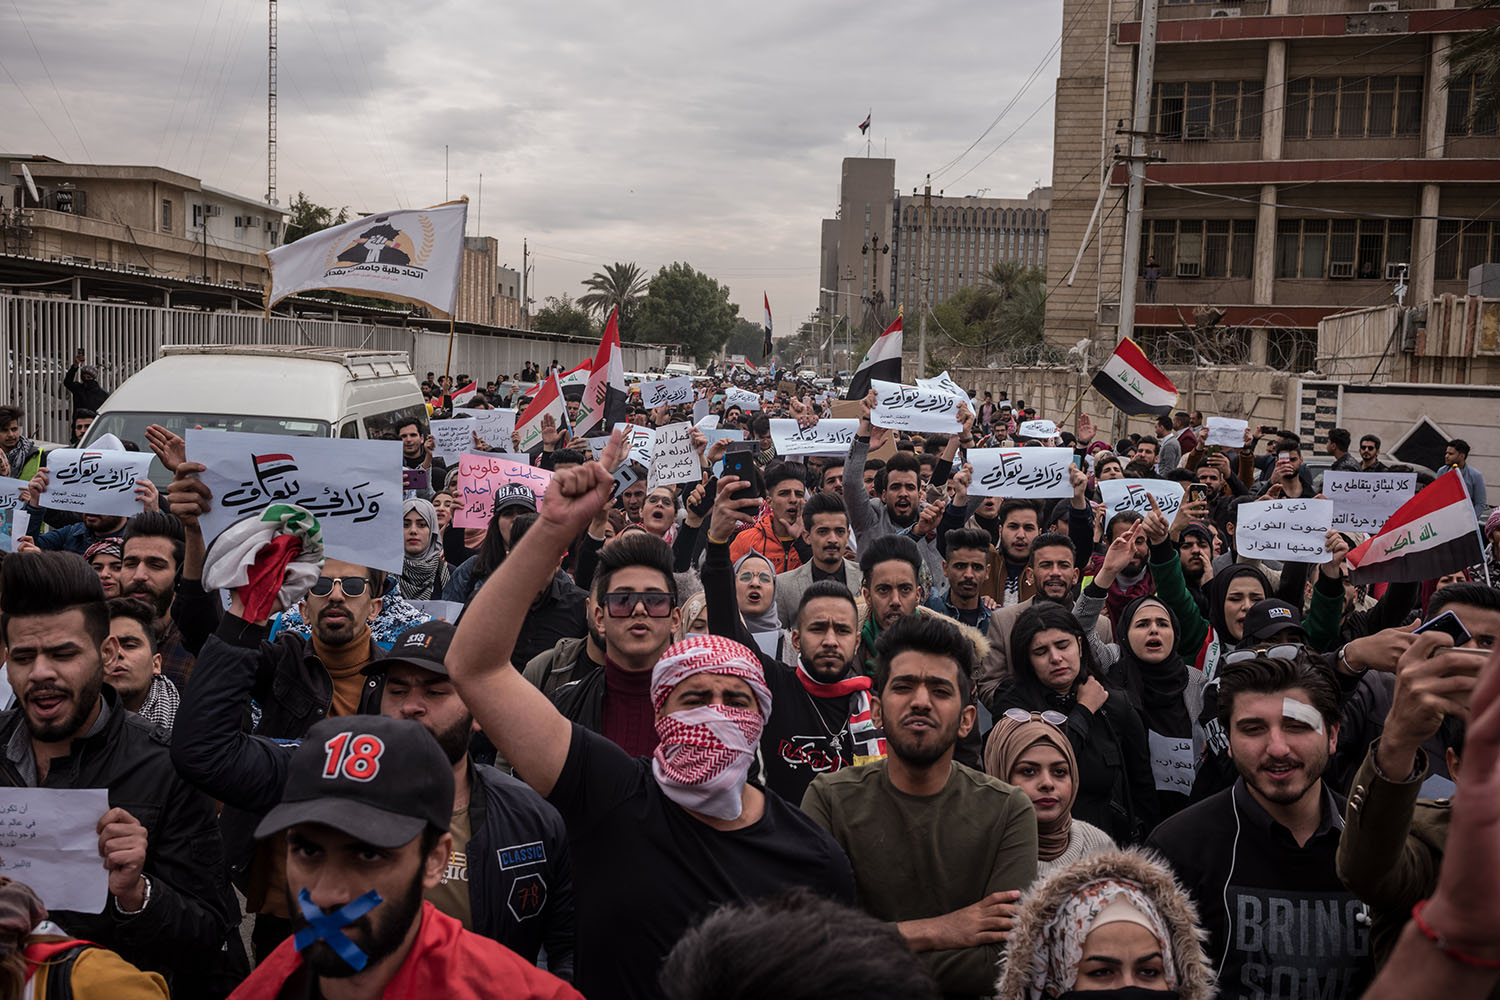 Since October 2019, a protest movement has emerged in Iraq, led principally by high school and university students. Baghdad.